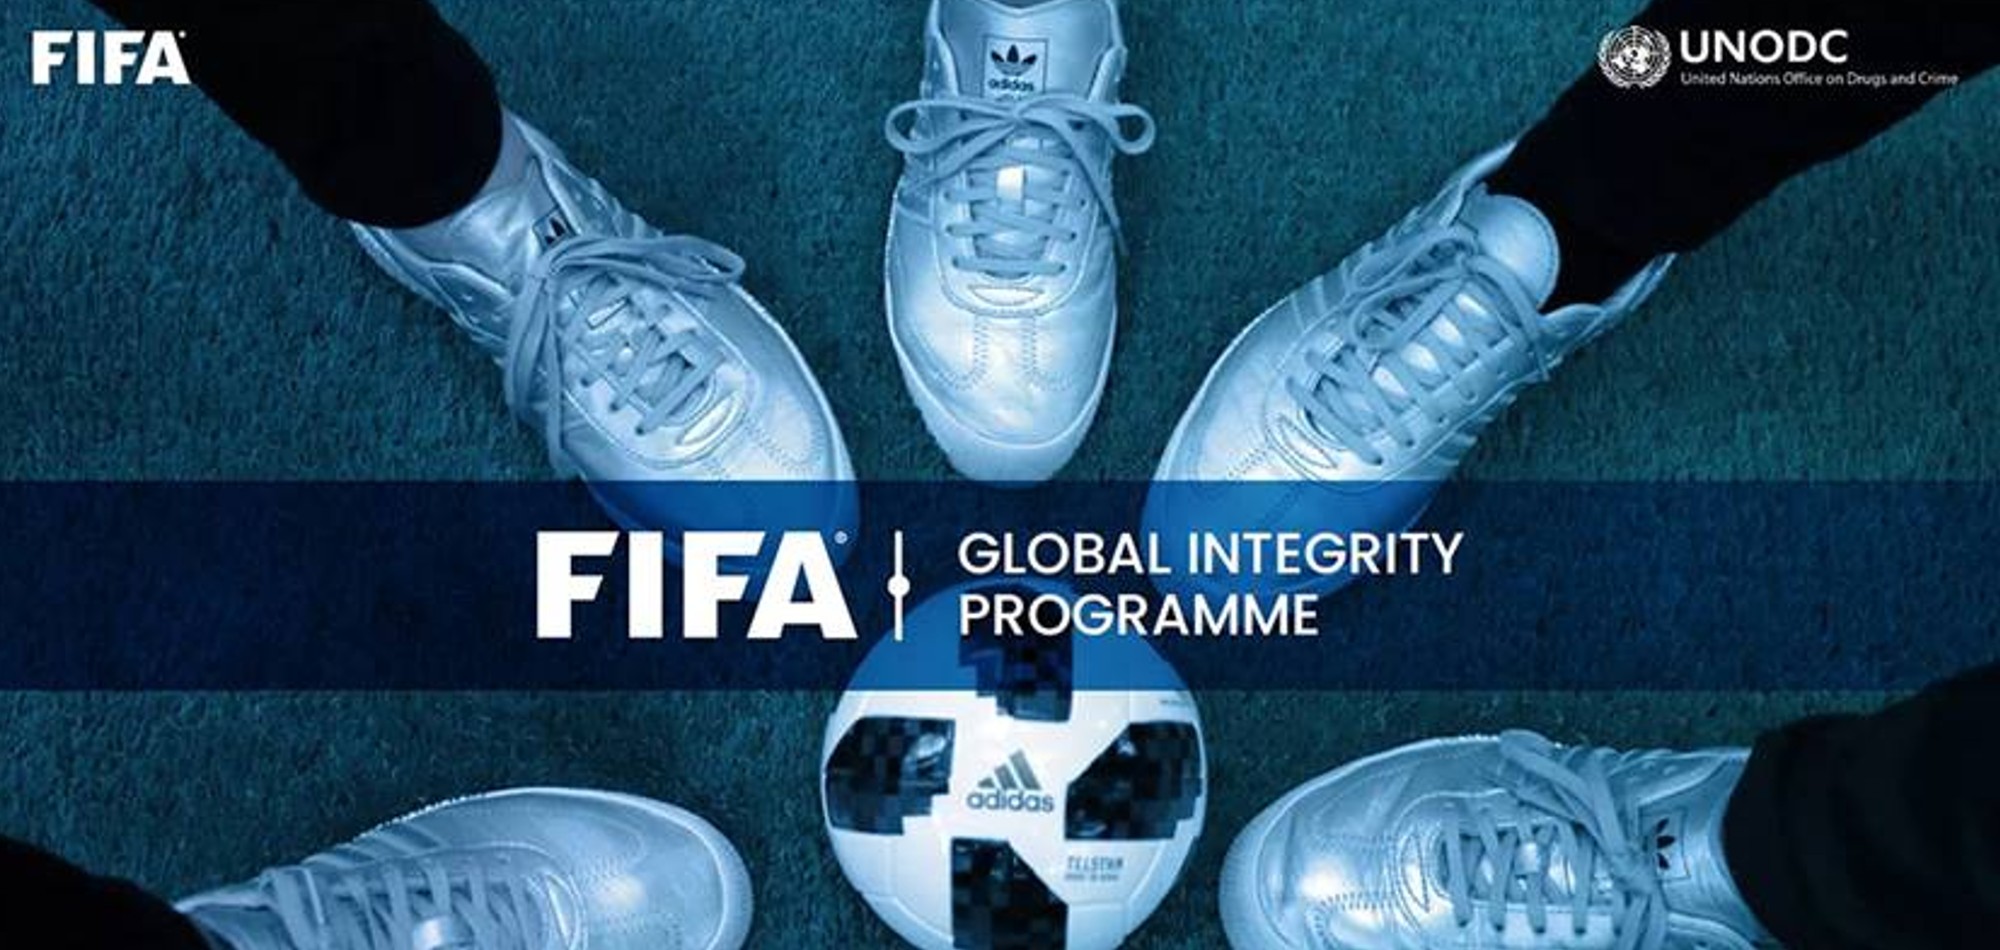 FIFA and UNDOC Concludes its first Global Programme Tackling Match-Fixing